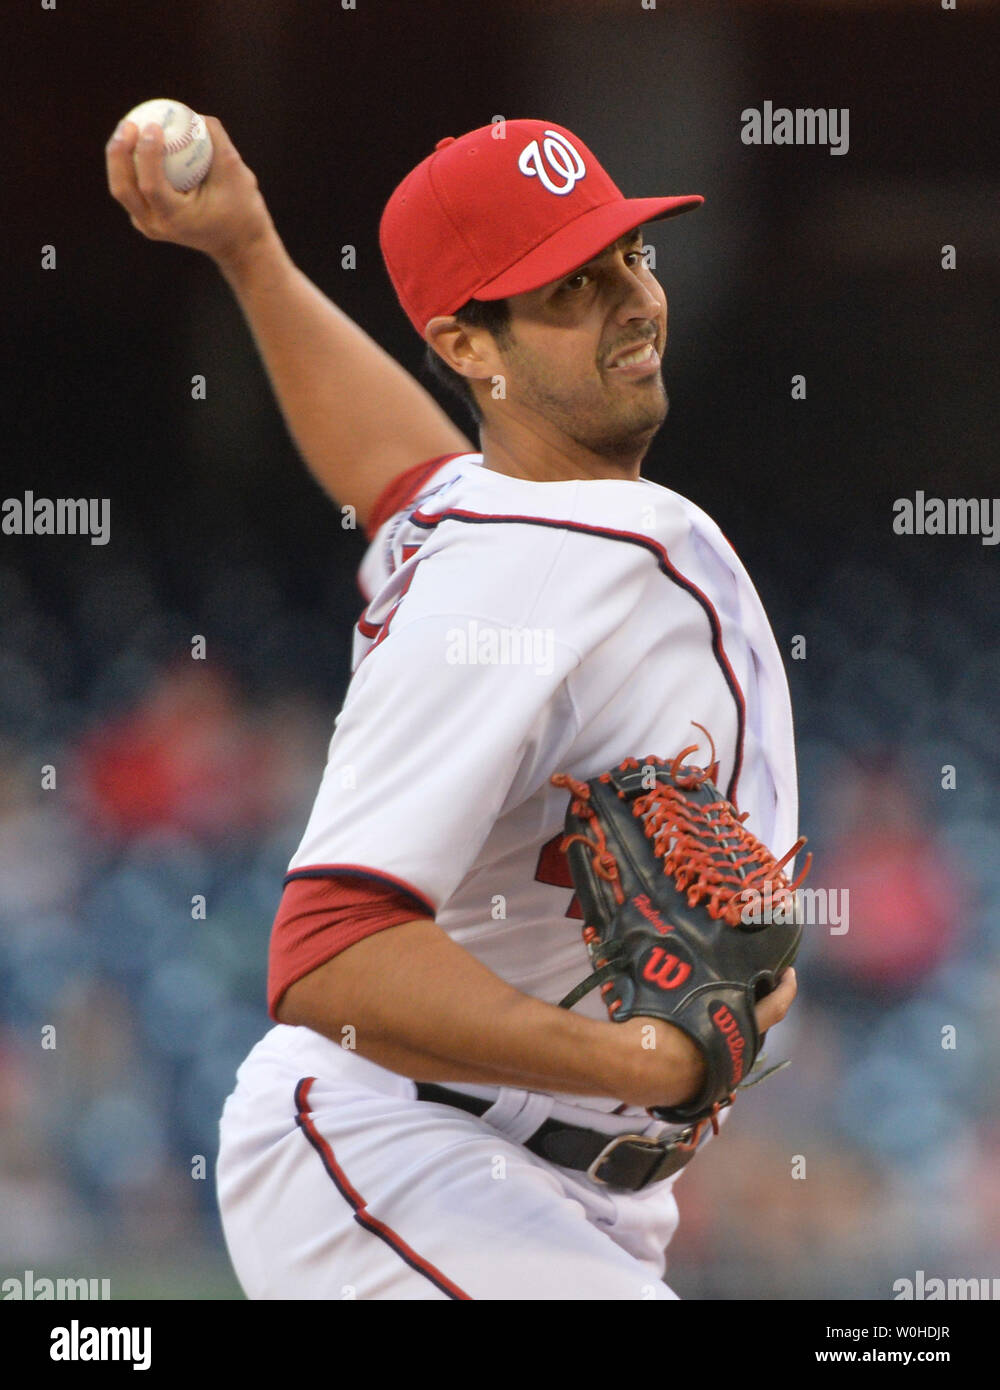 Washington Nationals pitcher Gio Gonzalez pitches against the L.A. Angles in the first inning at Nationals Park in Washington, D.C. on April 23, 2014.  UPI/Kevin Dietsch Stock Photo